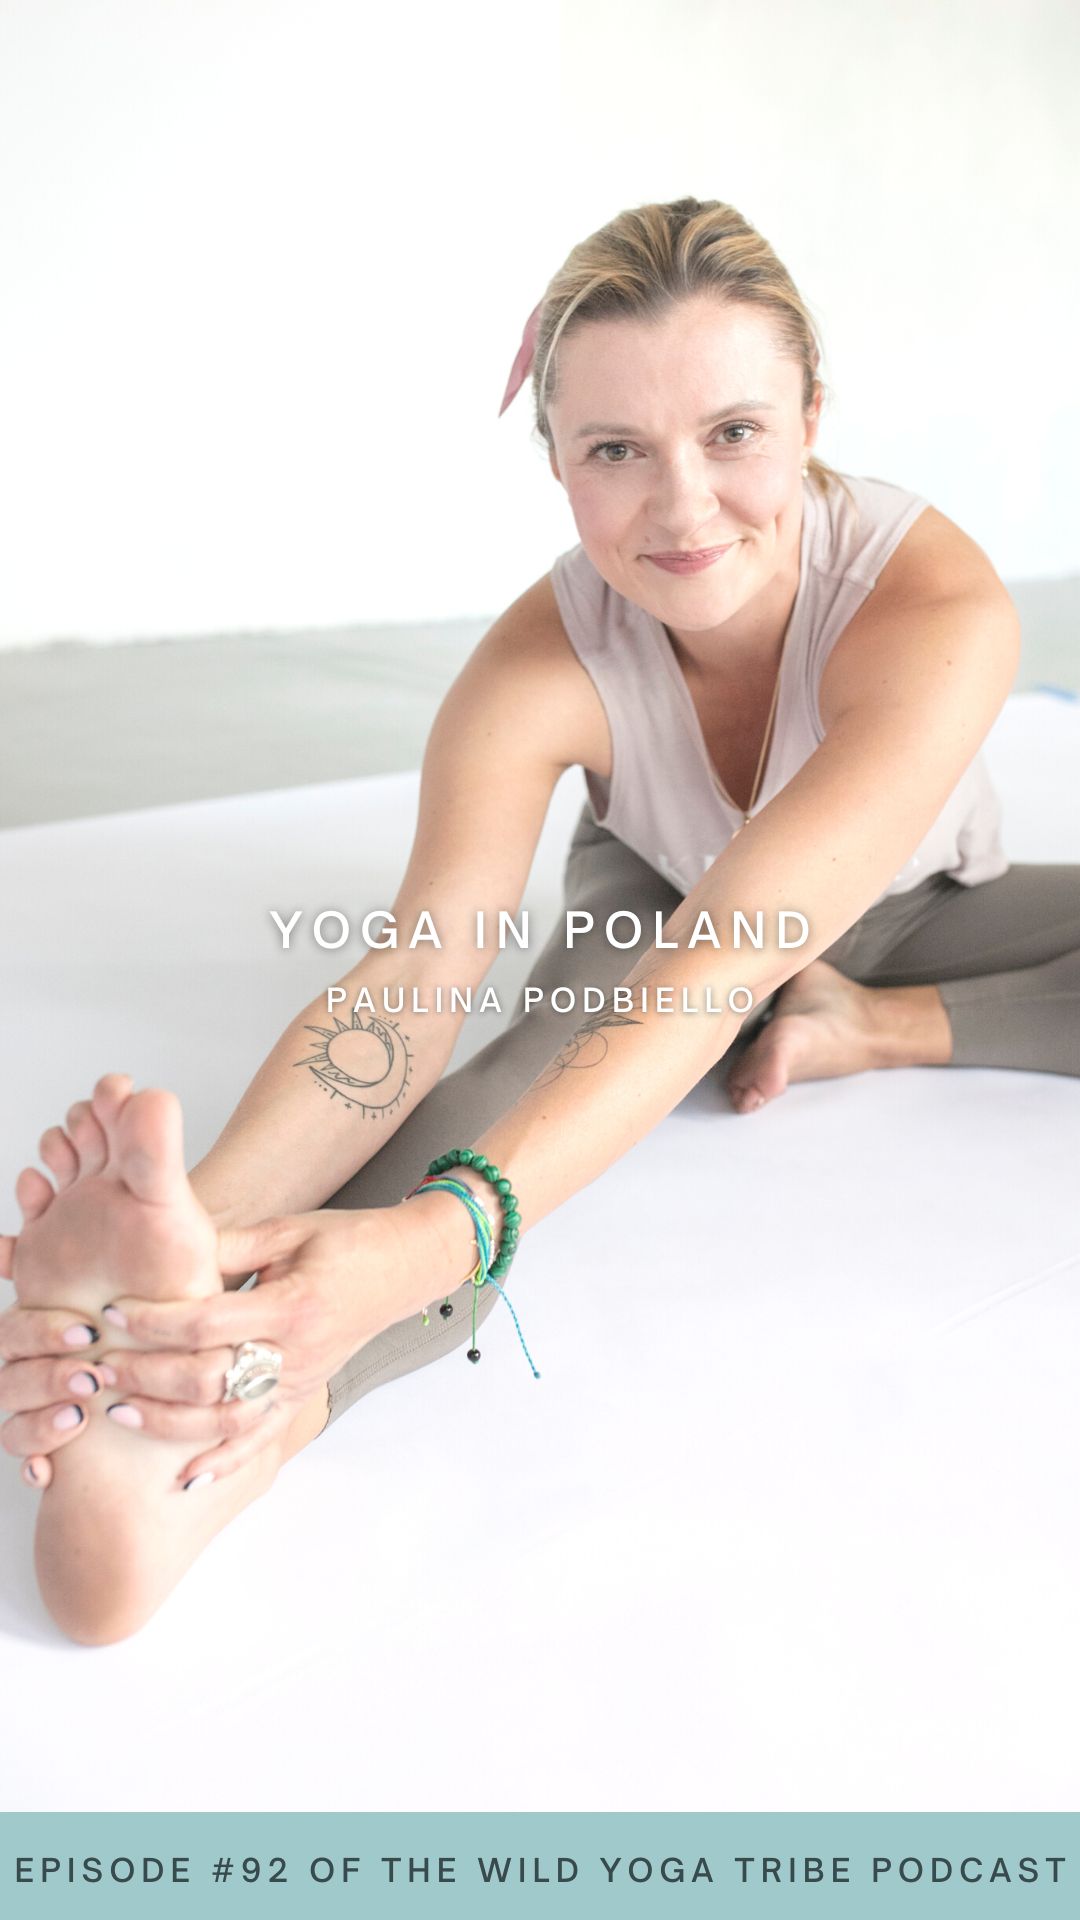 Meet Paulina Podbiello, a yoga teacher from Poland who ignites the power of community and infuses her classes with childlike energy and playfulness. Embrace curiosity, let go of judgment, and rediscover the wonder of life as she guides you to explore your body and breathe in the present moment. Welcome to the world of yoga in Poland! Poland Yoga, Yoga in Poland, Yoga Poland, Visit Poland, Poland, Travel Poland, Yoga Around the World, Global Yoga, International Yoga, Wild Yoga Tribe, Yoga Teacher, and Yoga Teacher Story